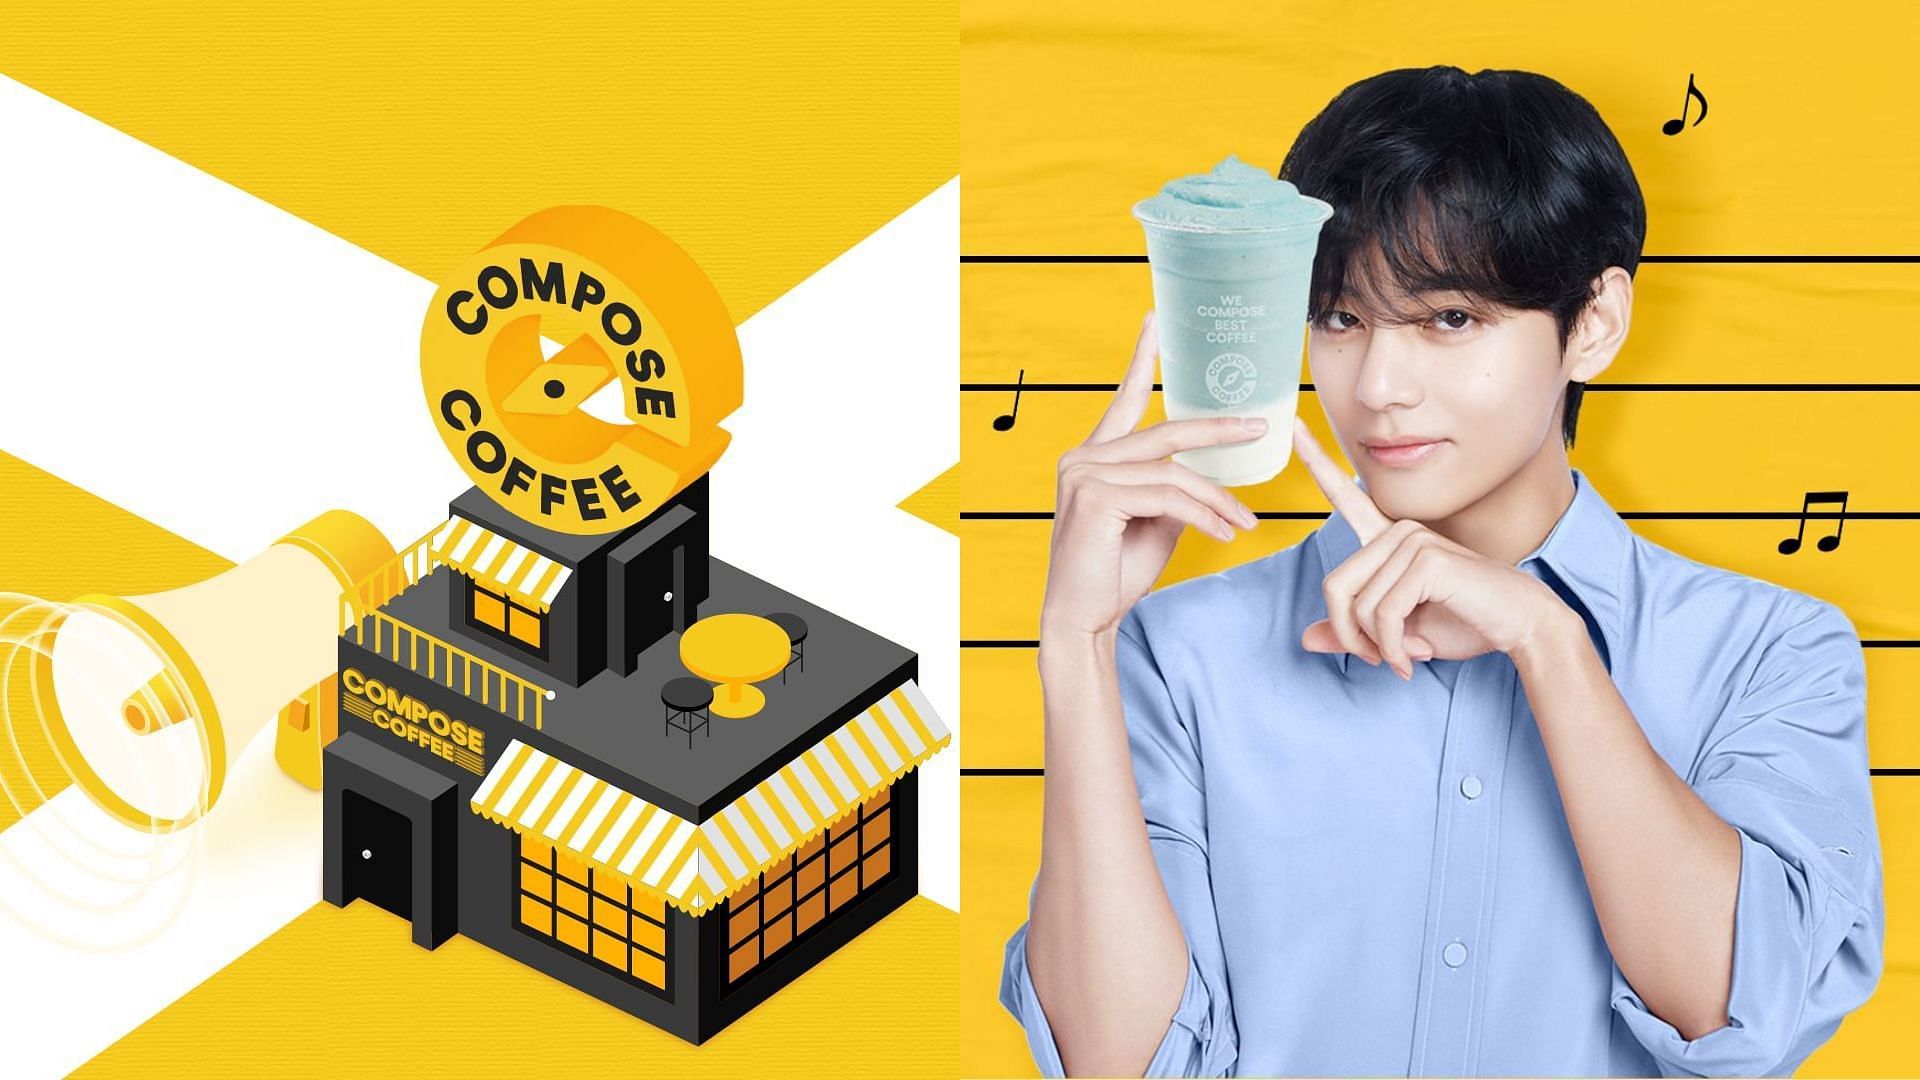 Did Compose Coffee open new franchise in London amid soaring demand after BTS